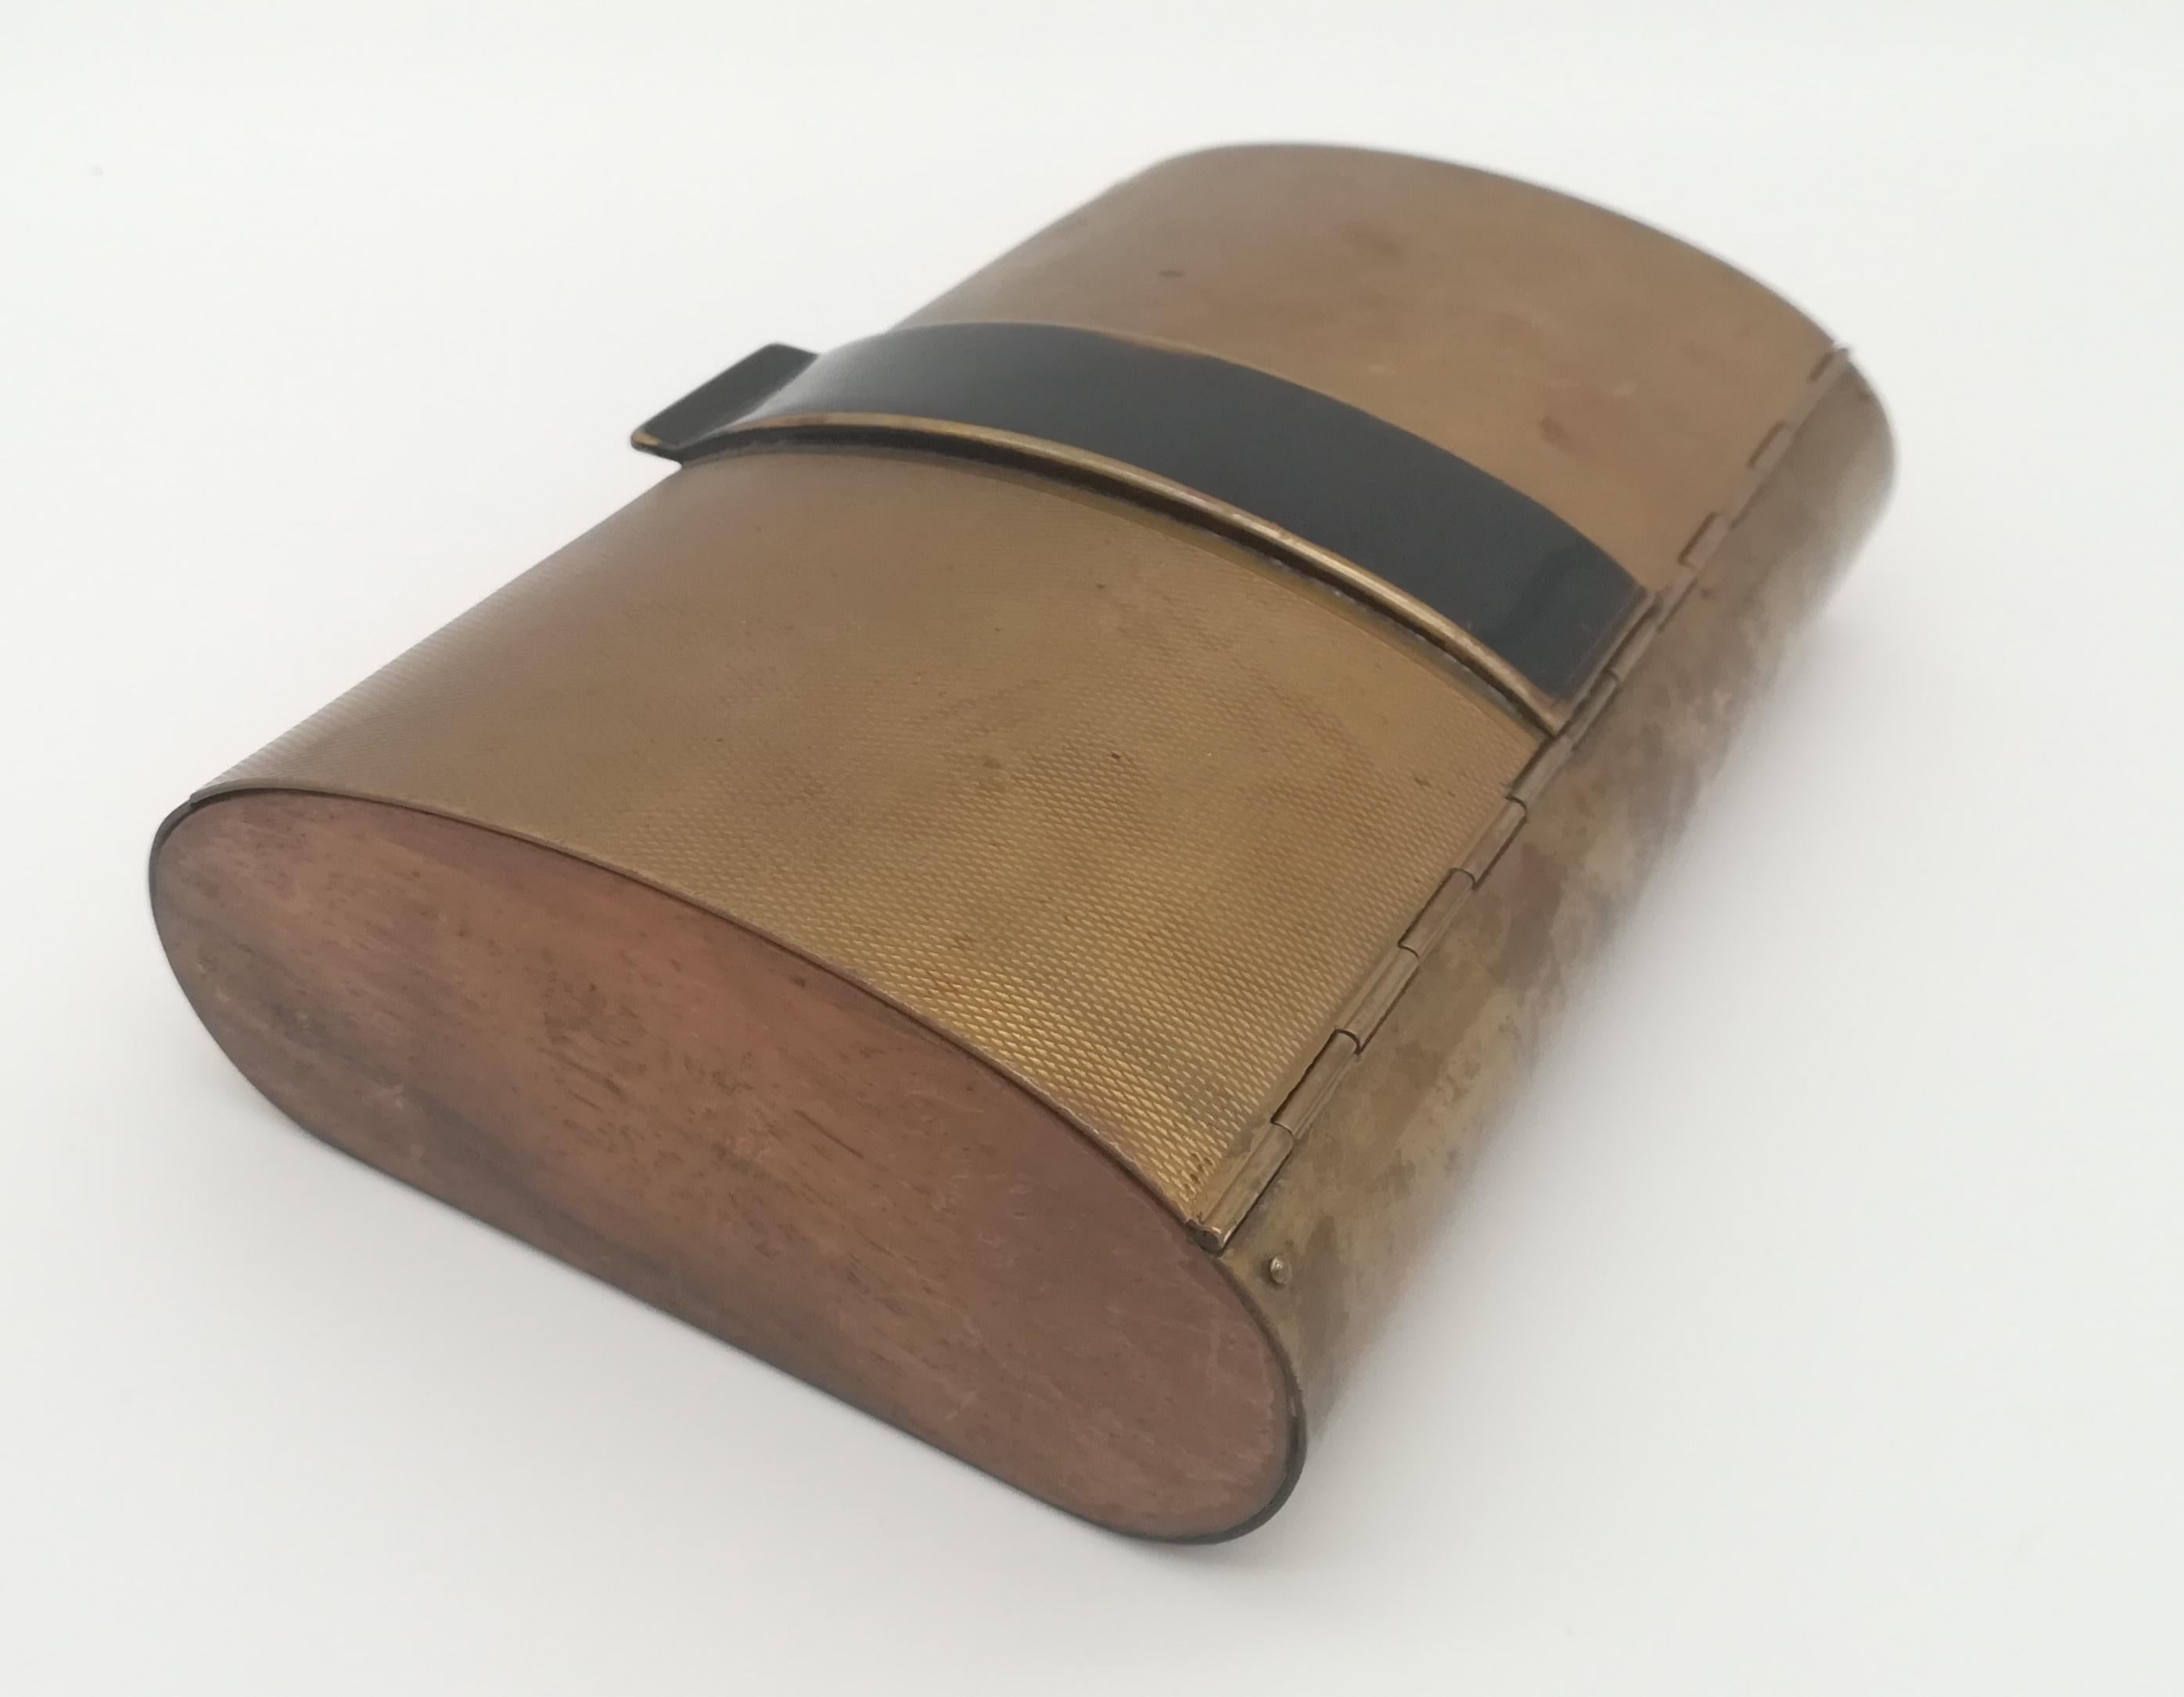 Blackened Superb Mid-Century Caucasian Nutwood and Brass Cigarette Box by Carl Auböck